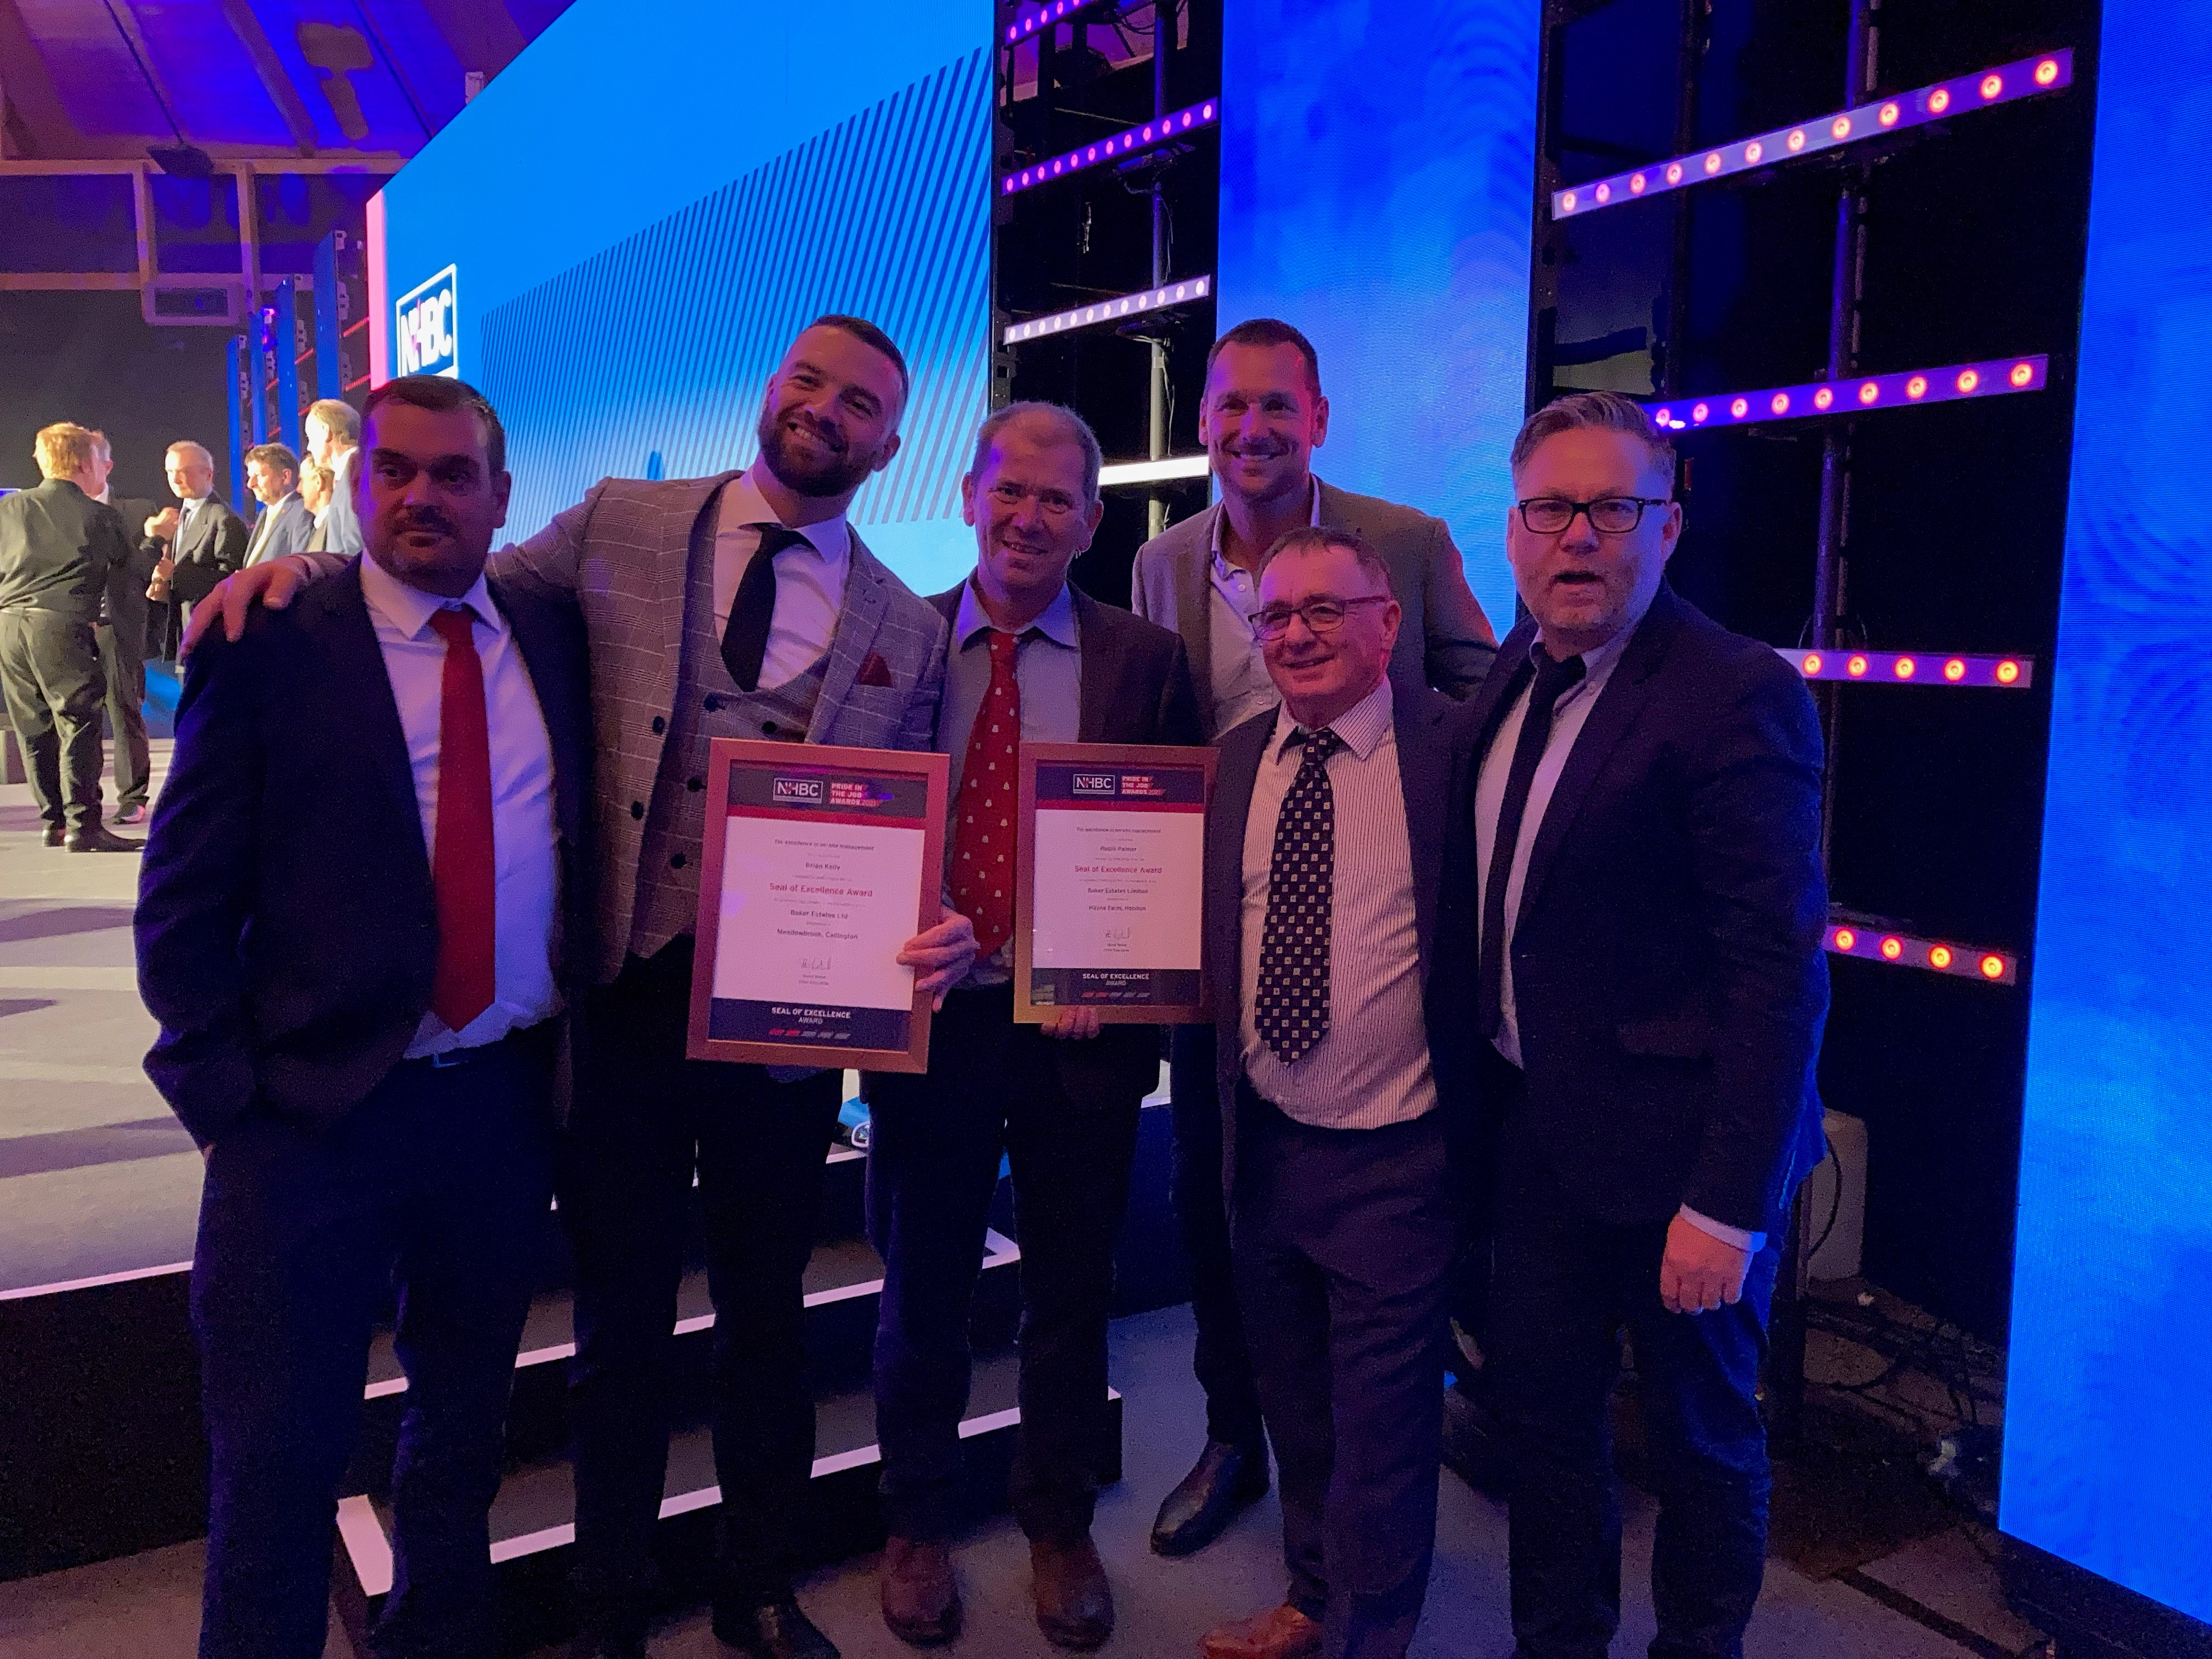 Baker Estates’ site managers awarded top accolades for house building excellence in the south west